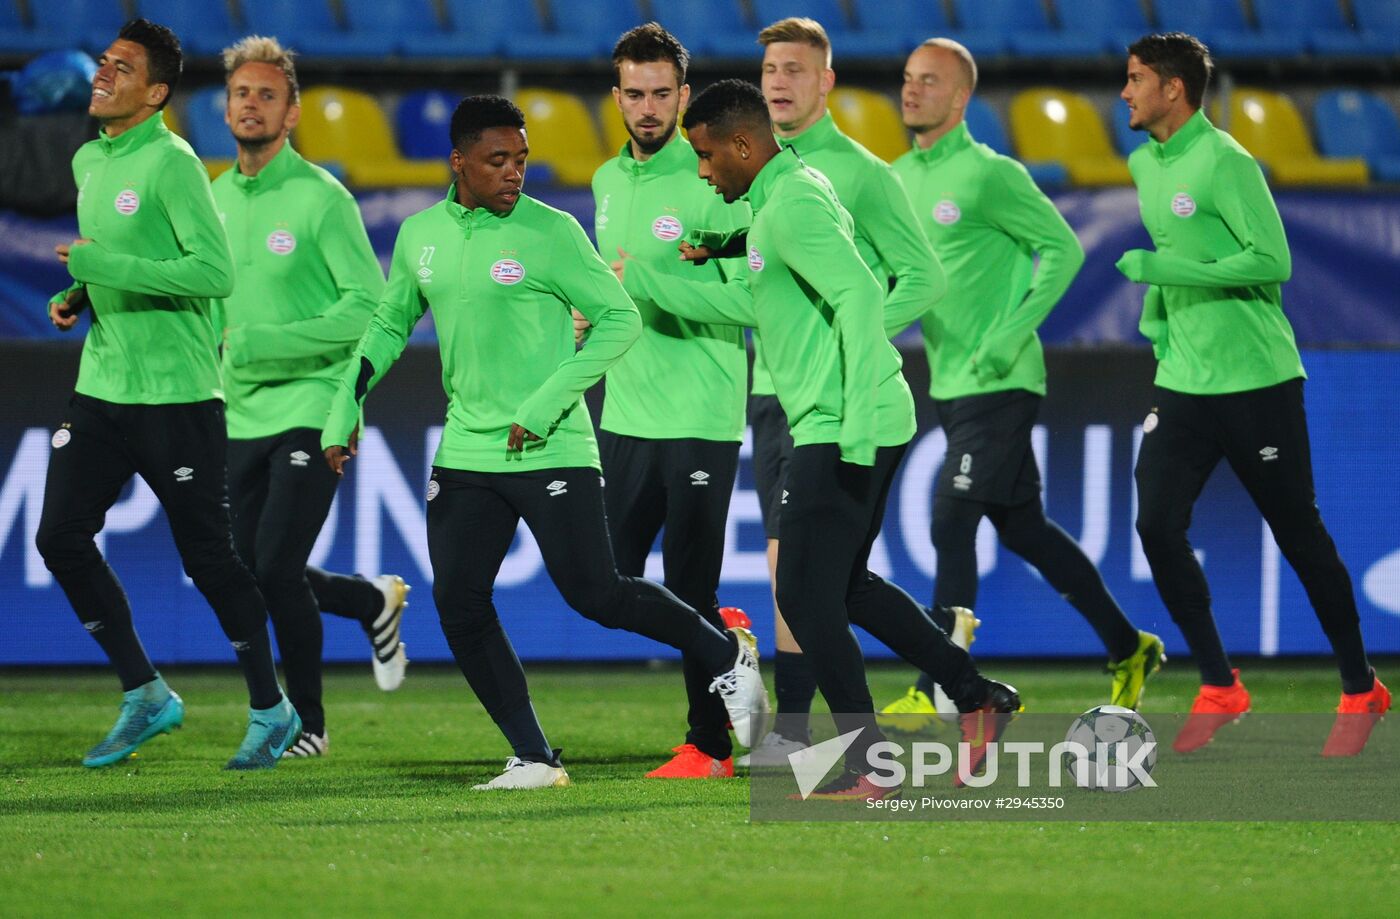 Football. League of Champions. PSV holds training session